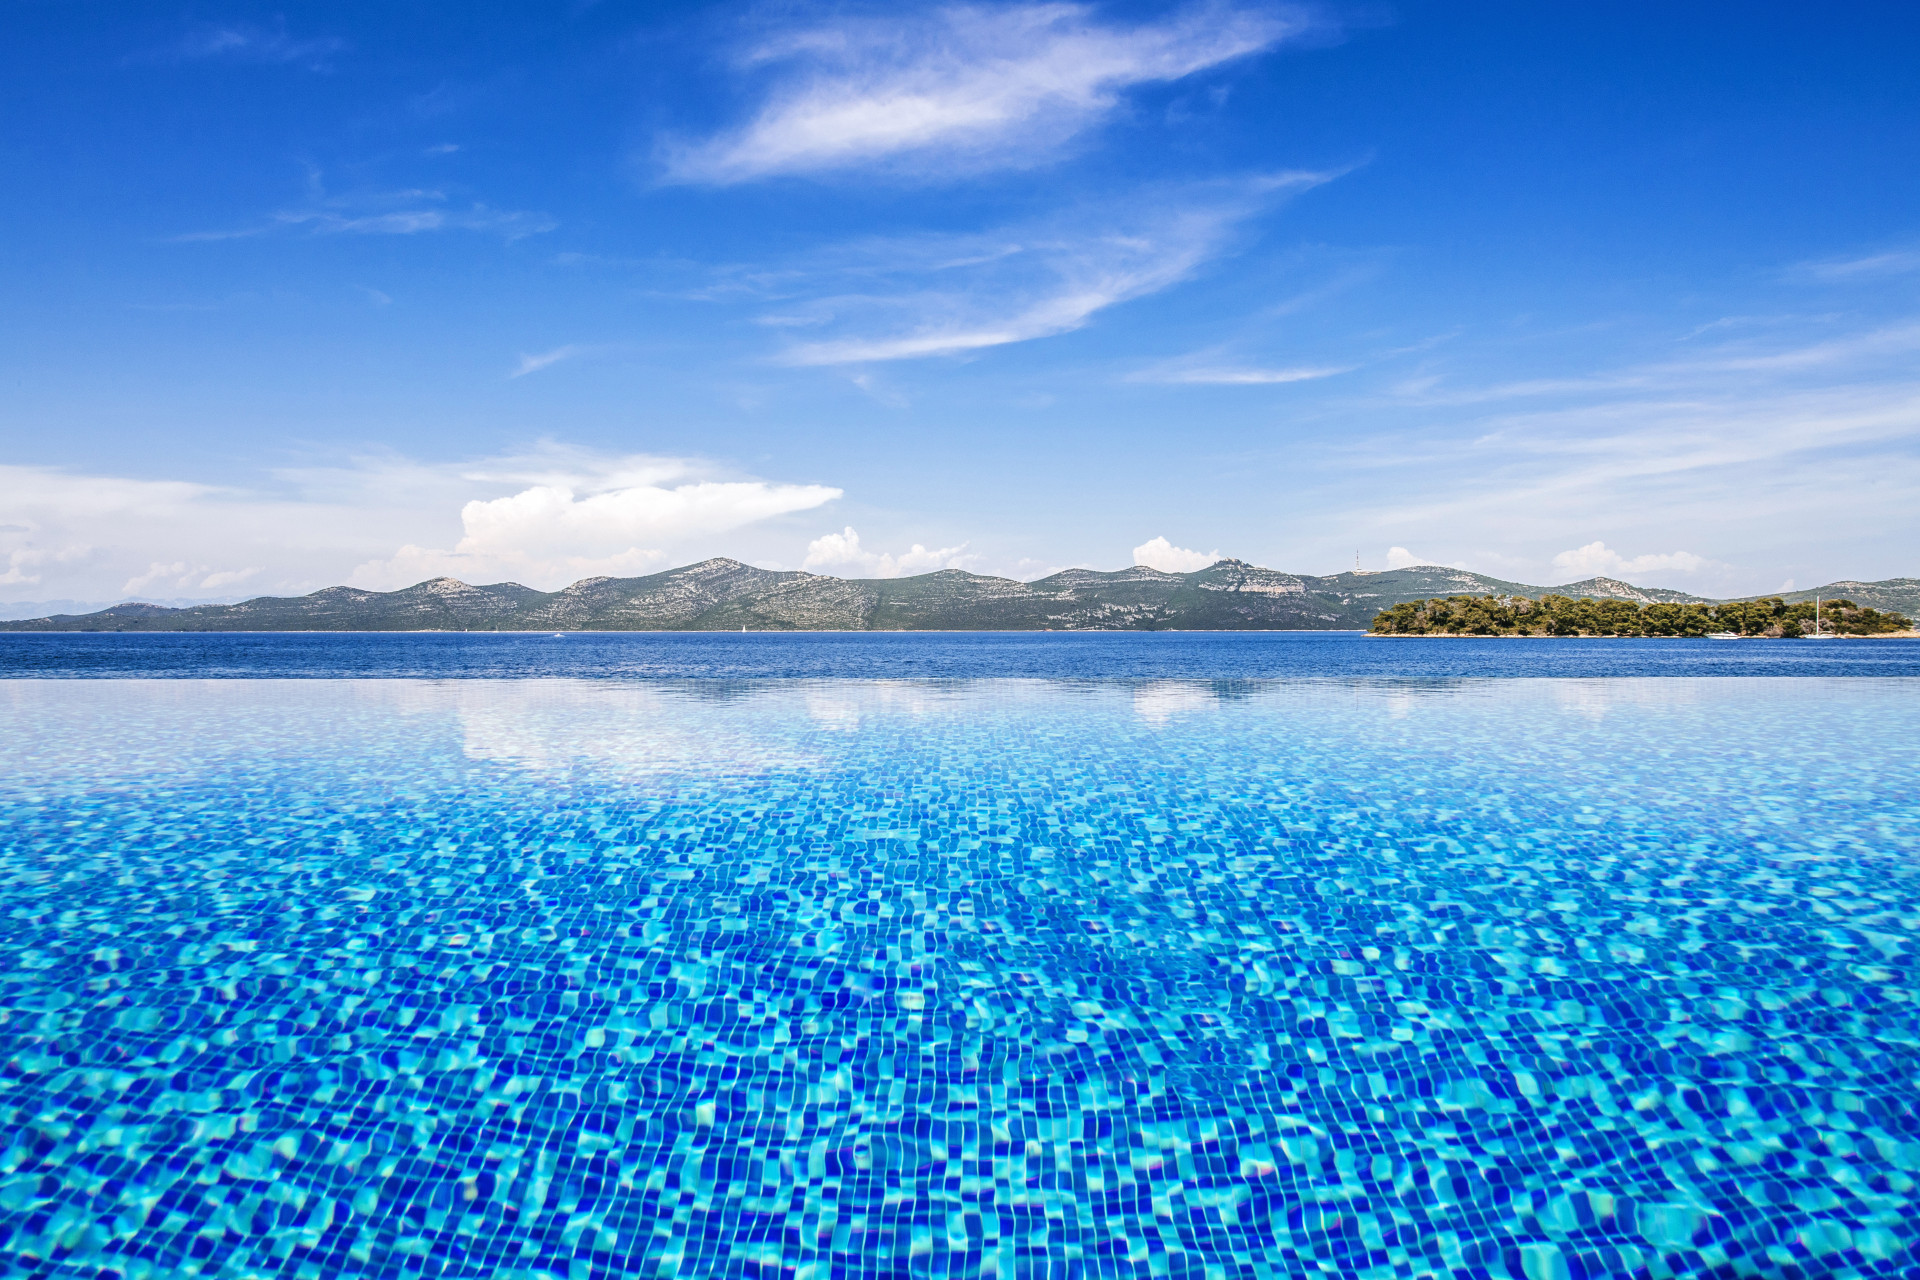 Luxury Villas With a Private Pool in Croatia: Our Top Picks